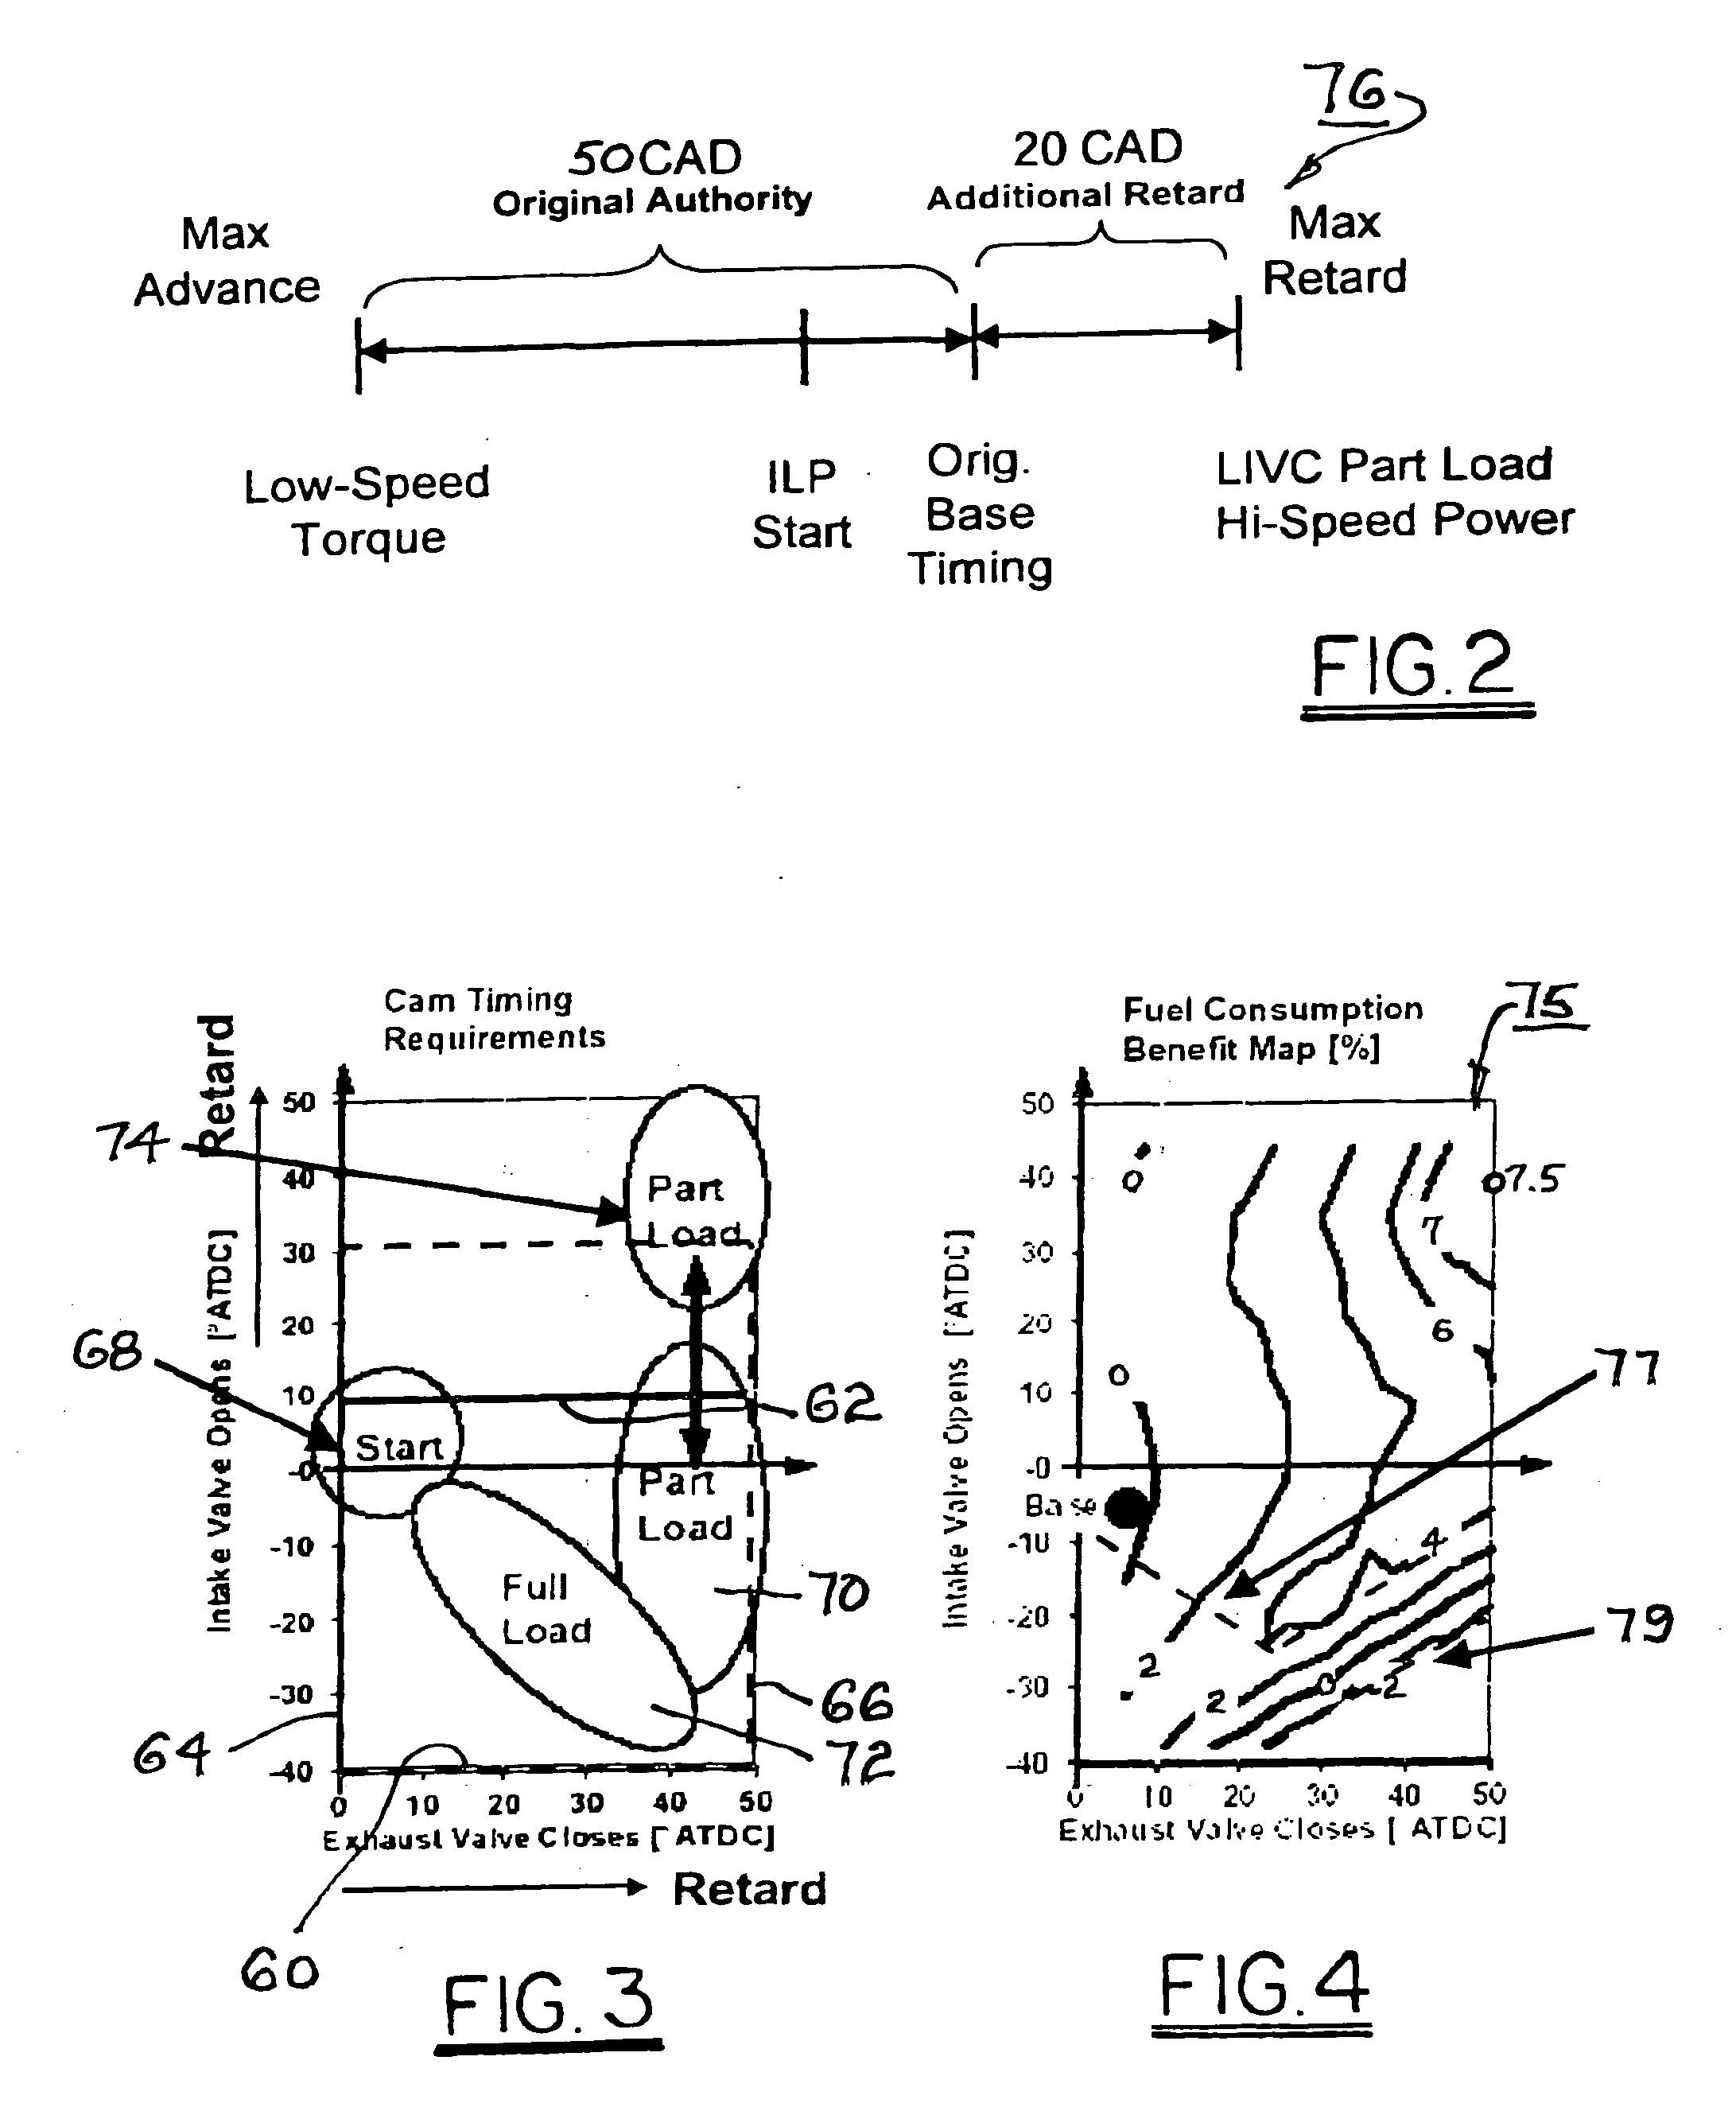 Vane-type cam phaser having increased rotational authority, intermediate position locking, and dedicated oil supply